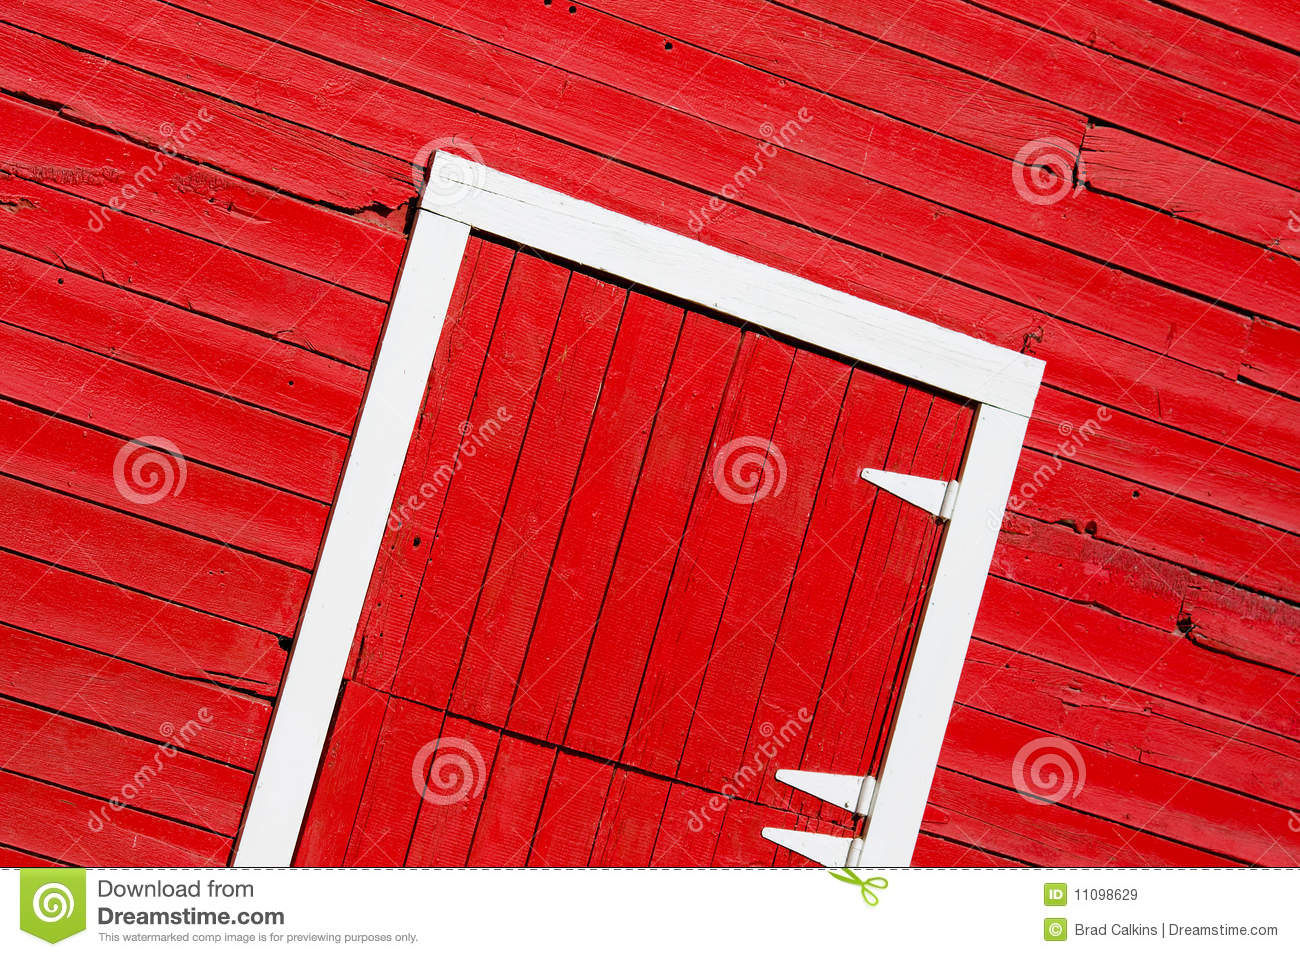 Red Barn Door Royalty Free Stock Images   Image  11098629